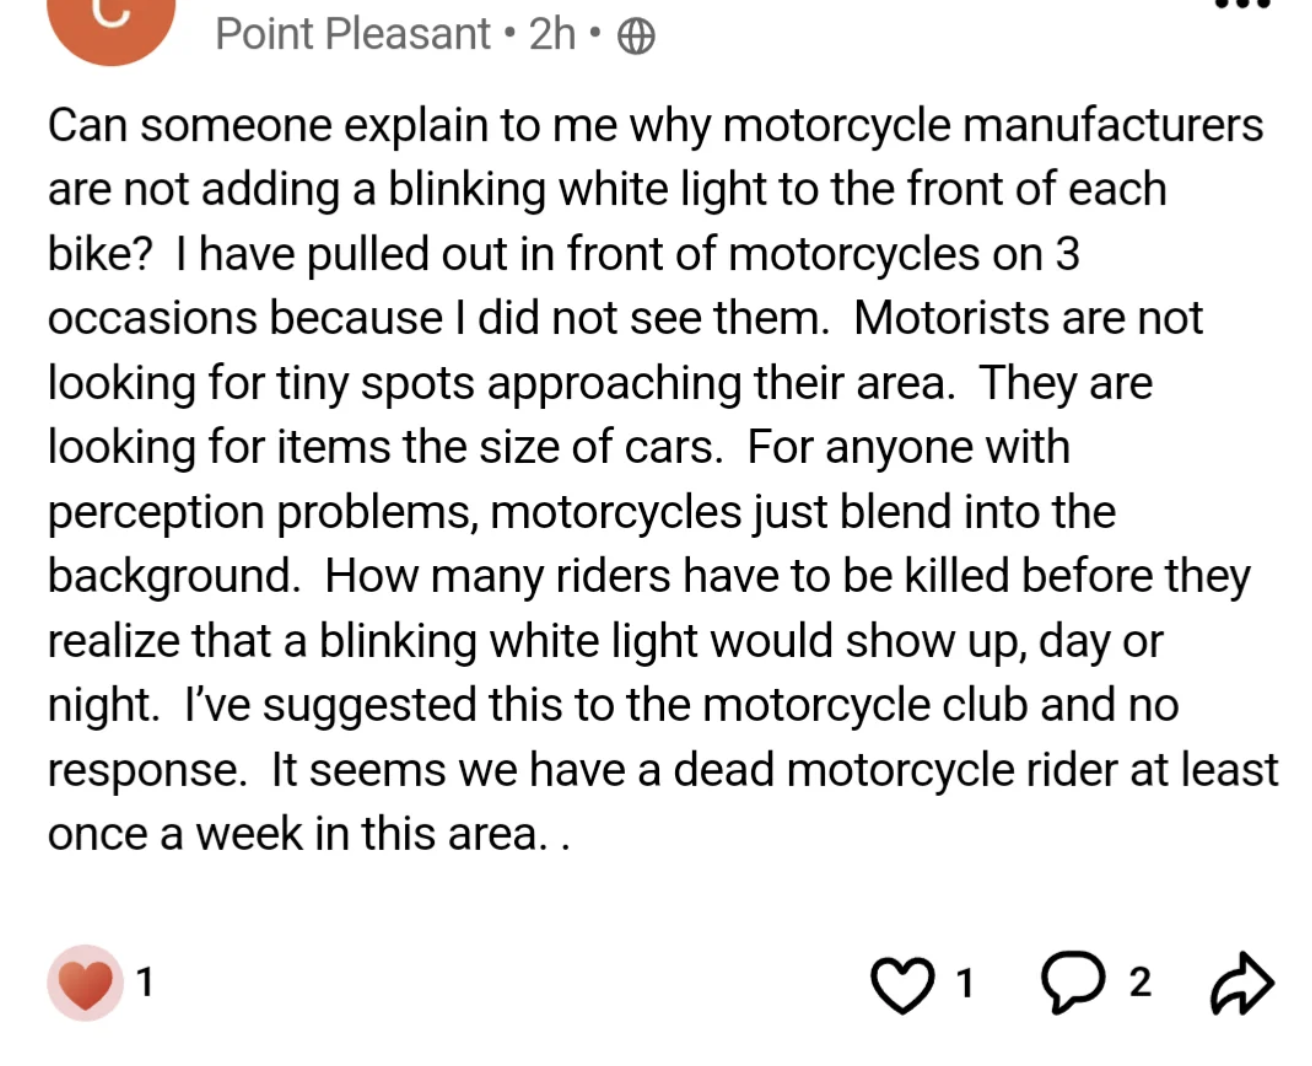 screenshot - Point Pleasant 2h Can someone explain to me why motorcycle manufacturers are not adding a blinking white light to the front of each bike? I have pulled out in front of motorcycles on 3 occasions because I did not see them. Motorists are not l